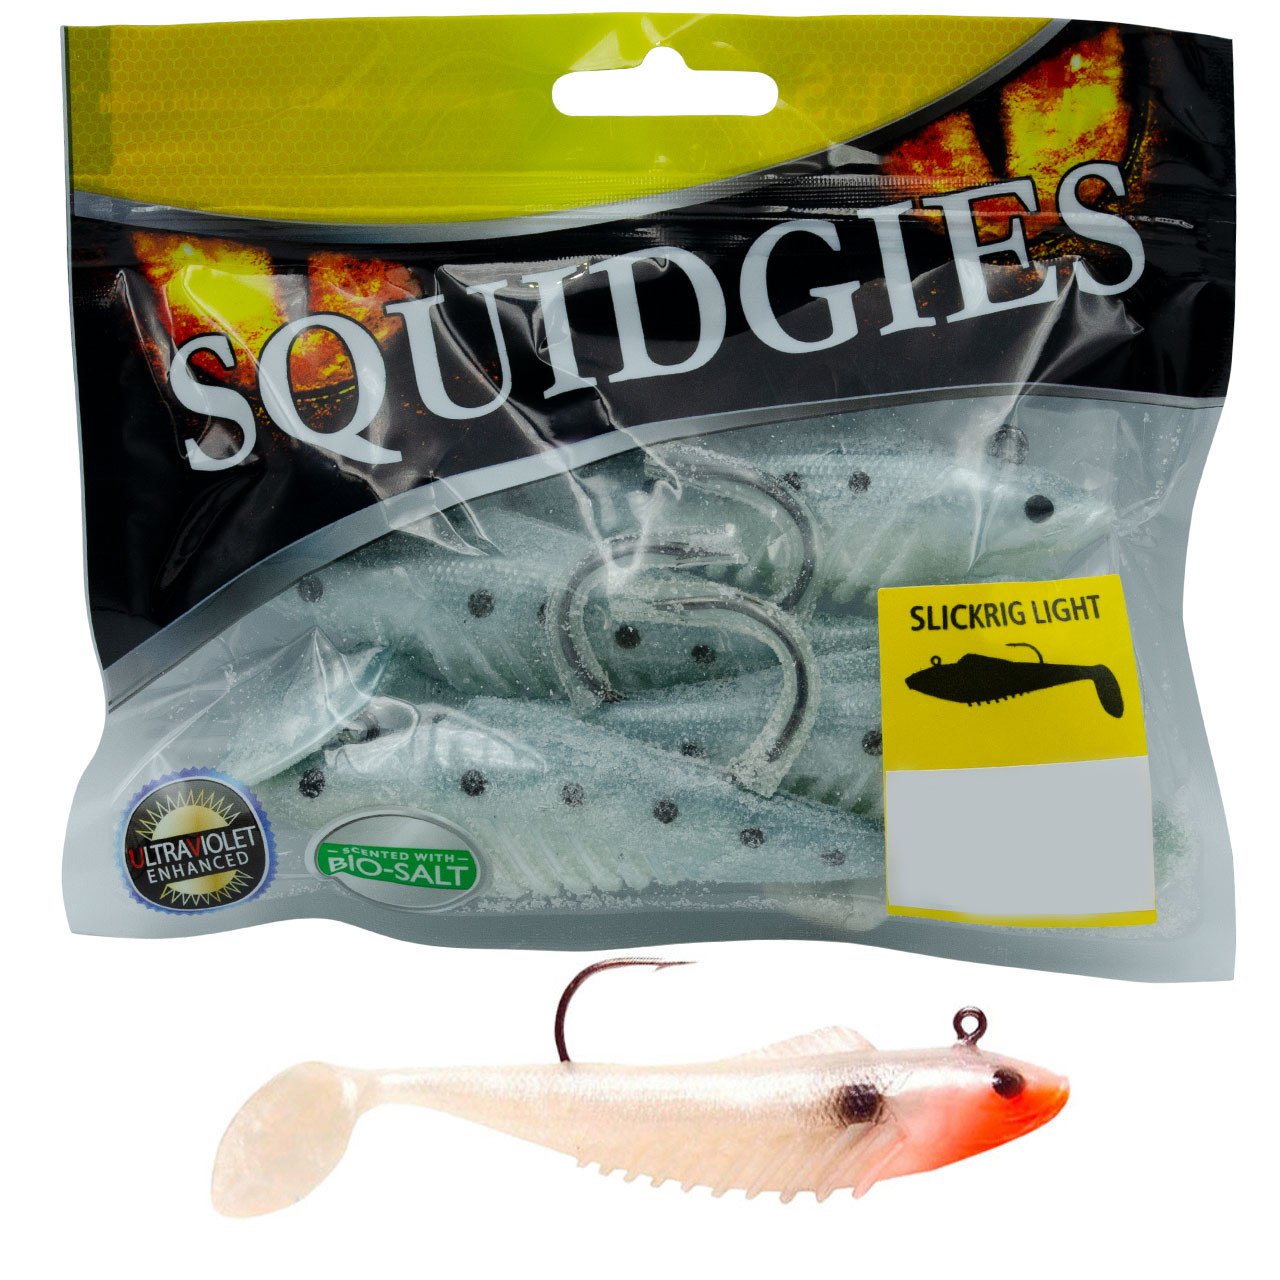 Squidgy Slick Rig Lures